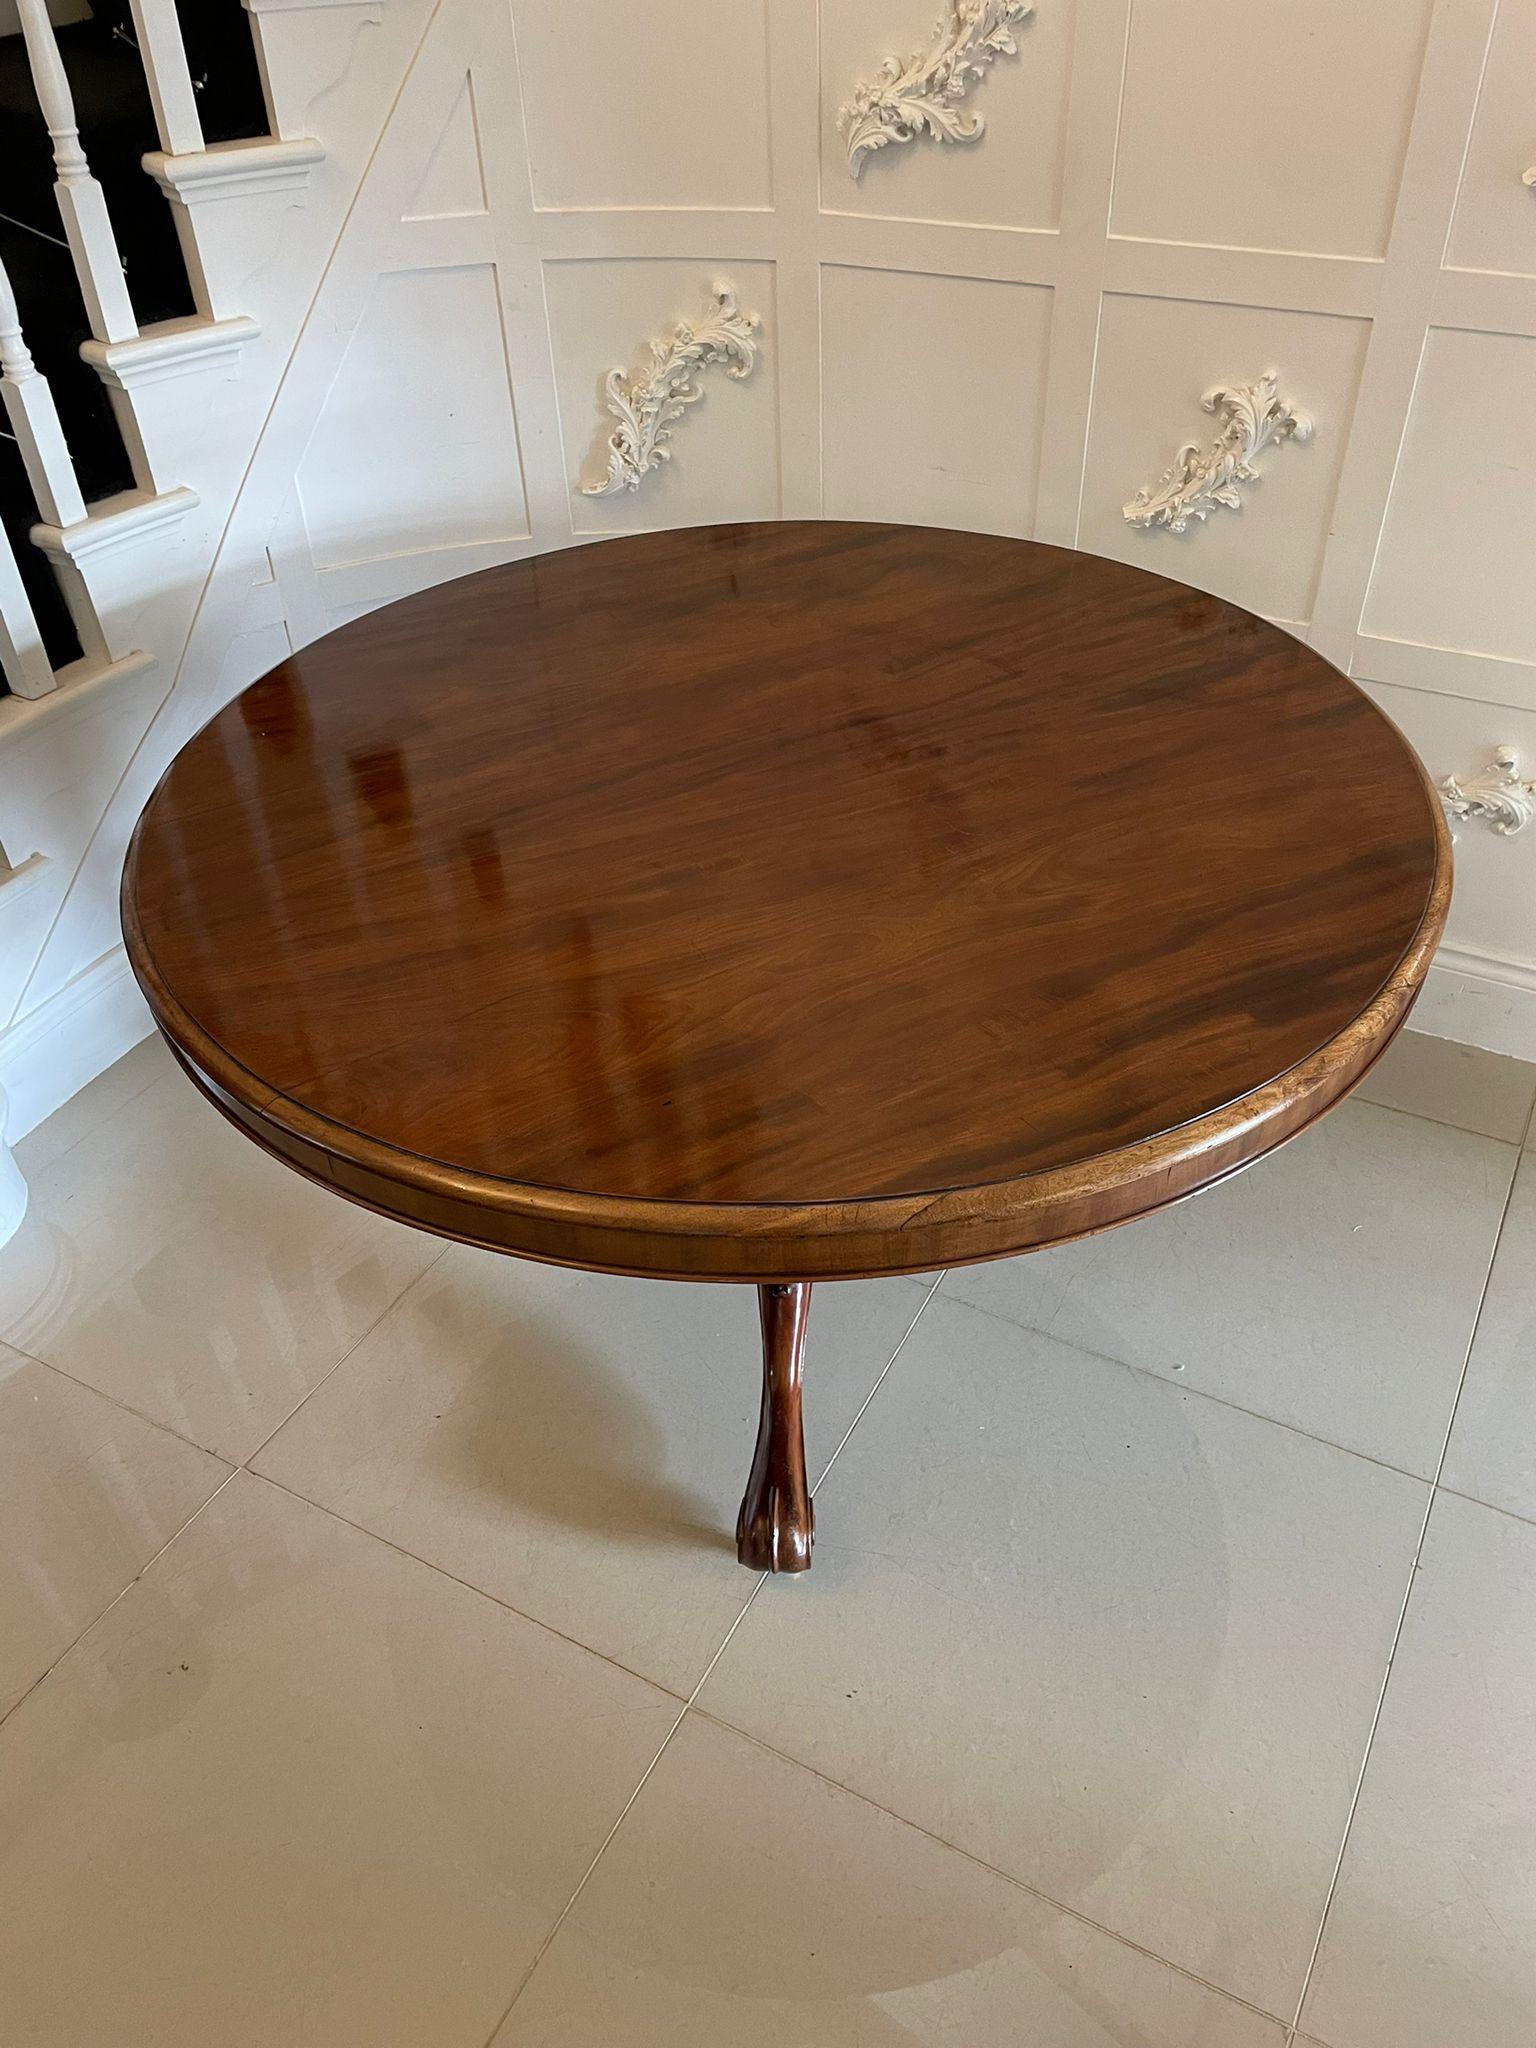 Outstanding quality antique Victorian figured mahogany 6 seater circular dining/centre table having an outstanding quality figured mahogany circular tilt top with a moulded edge, circular mahogany frieze supported by a turned carved mahogany